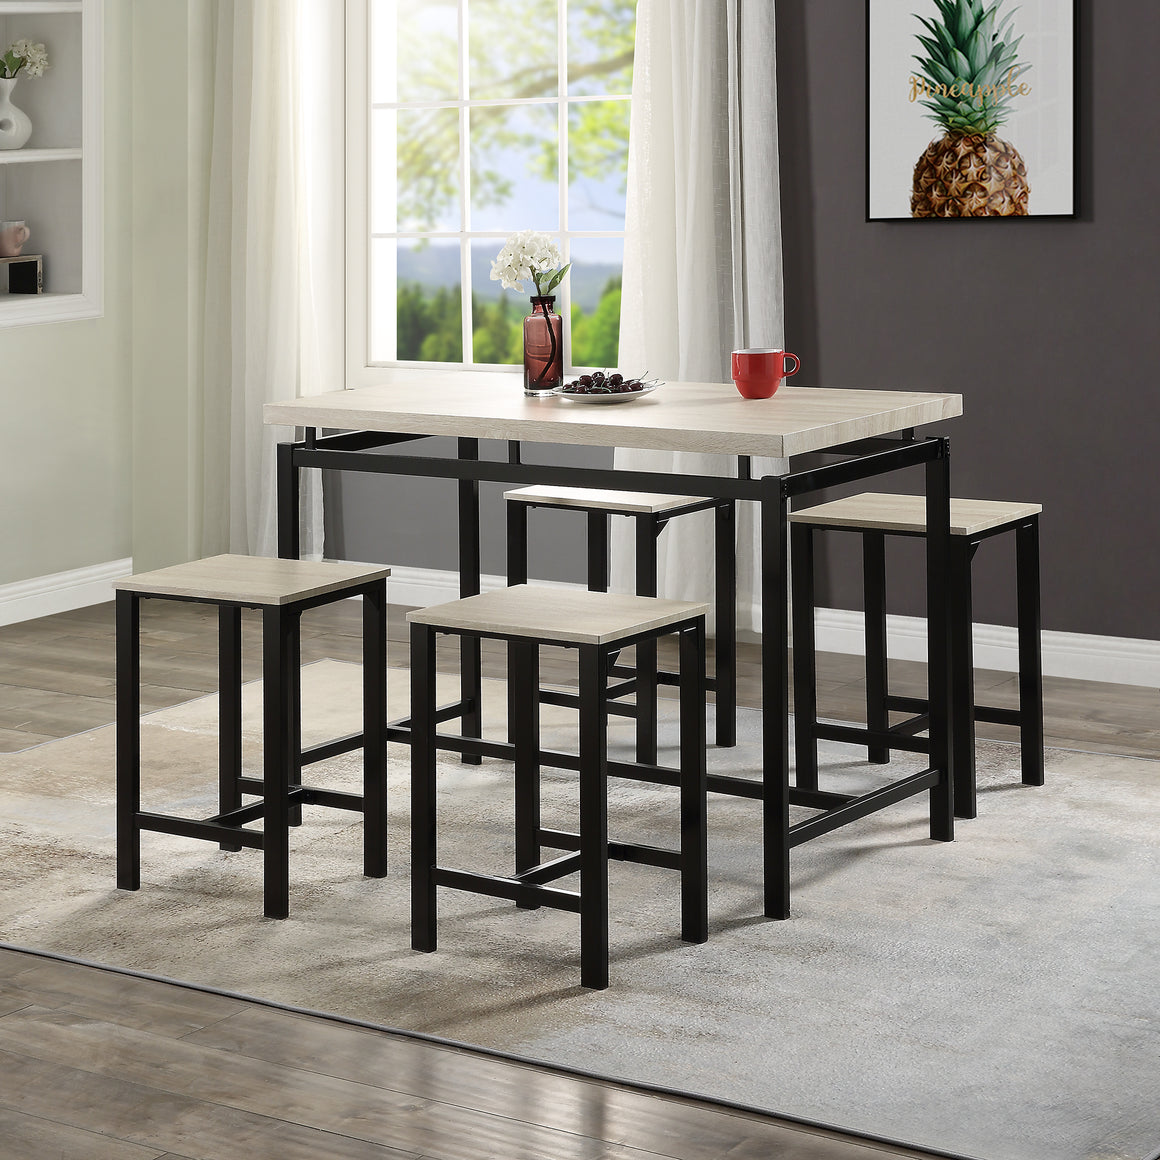 uhomepro Modern 5-Piece Counter Height Dining Set, Bar Pub Table Set with 4 Stools, Metal Frame Dining Room Table Set for Kitchen Small Apartment, Breakfast Nook